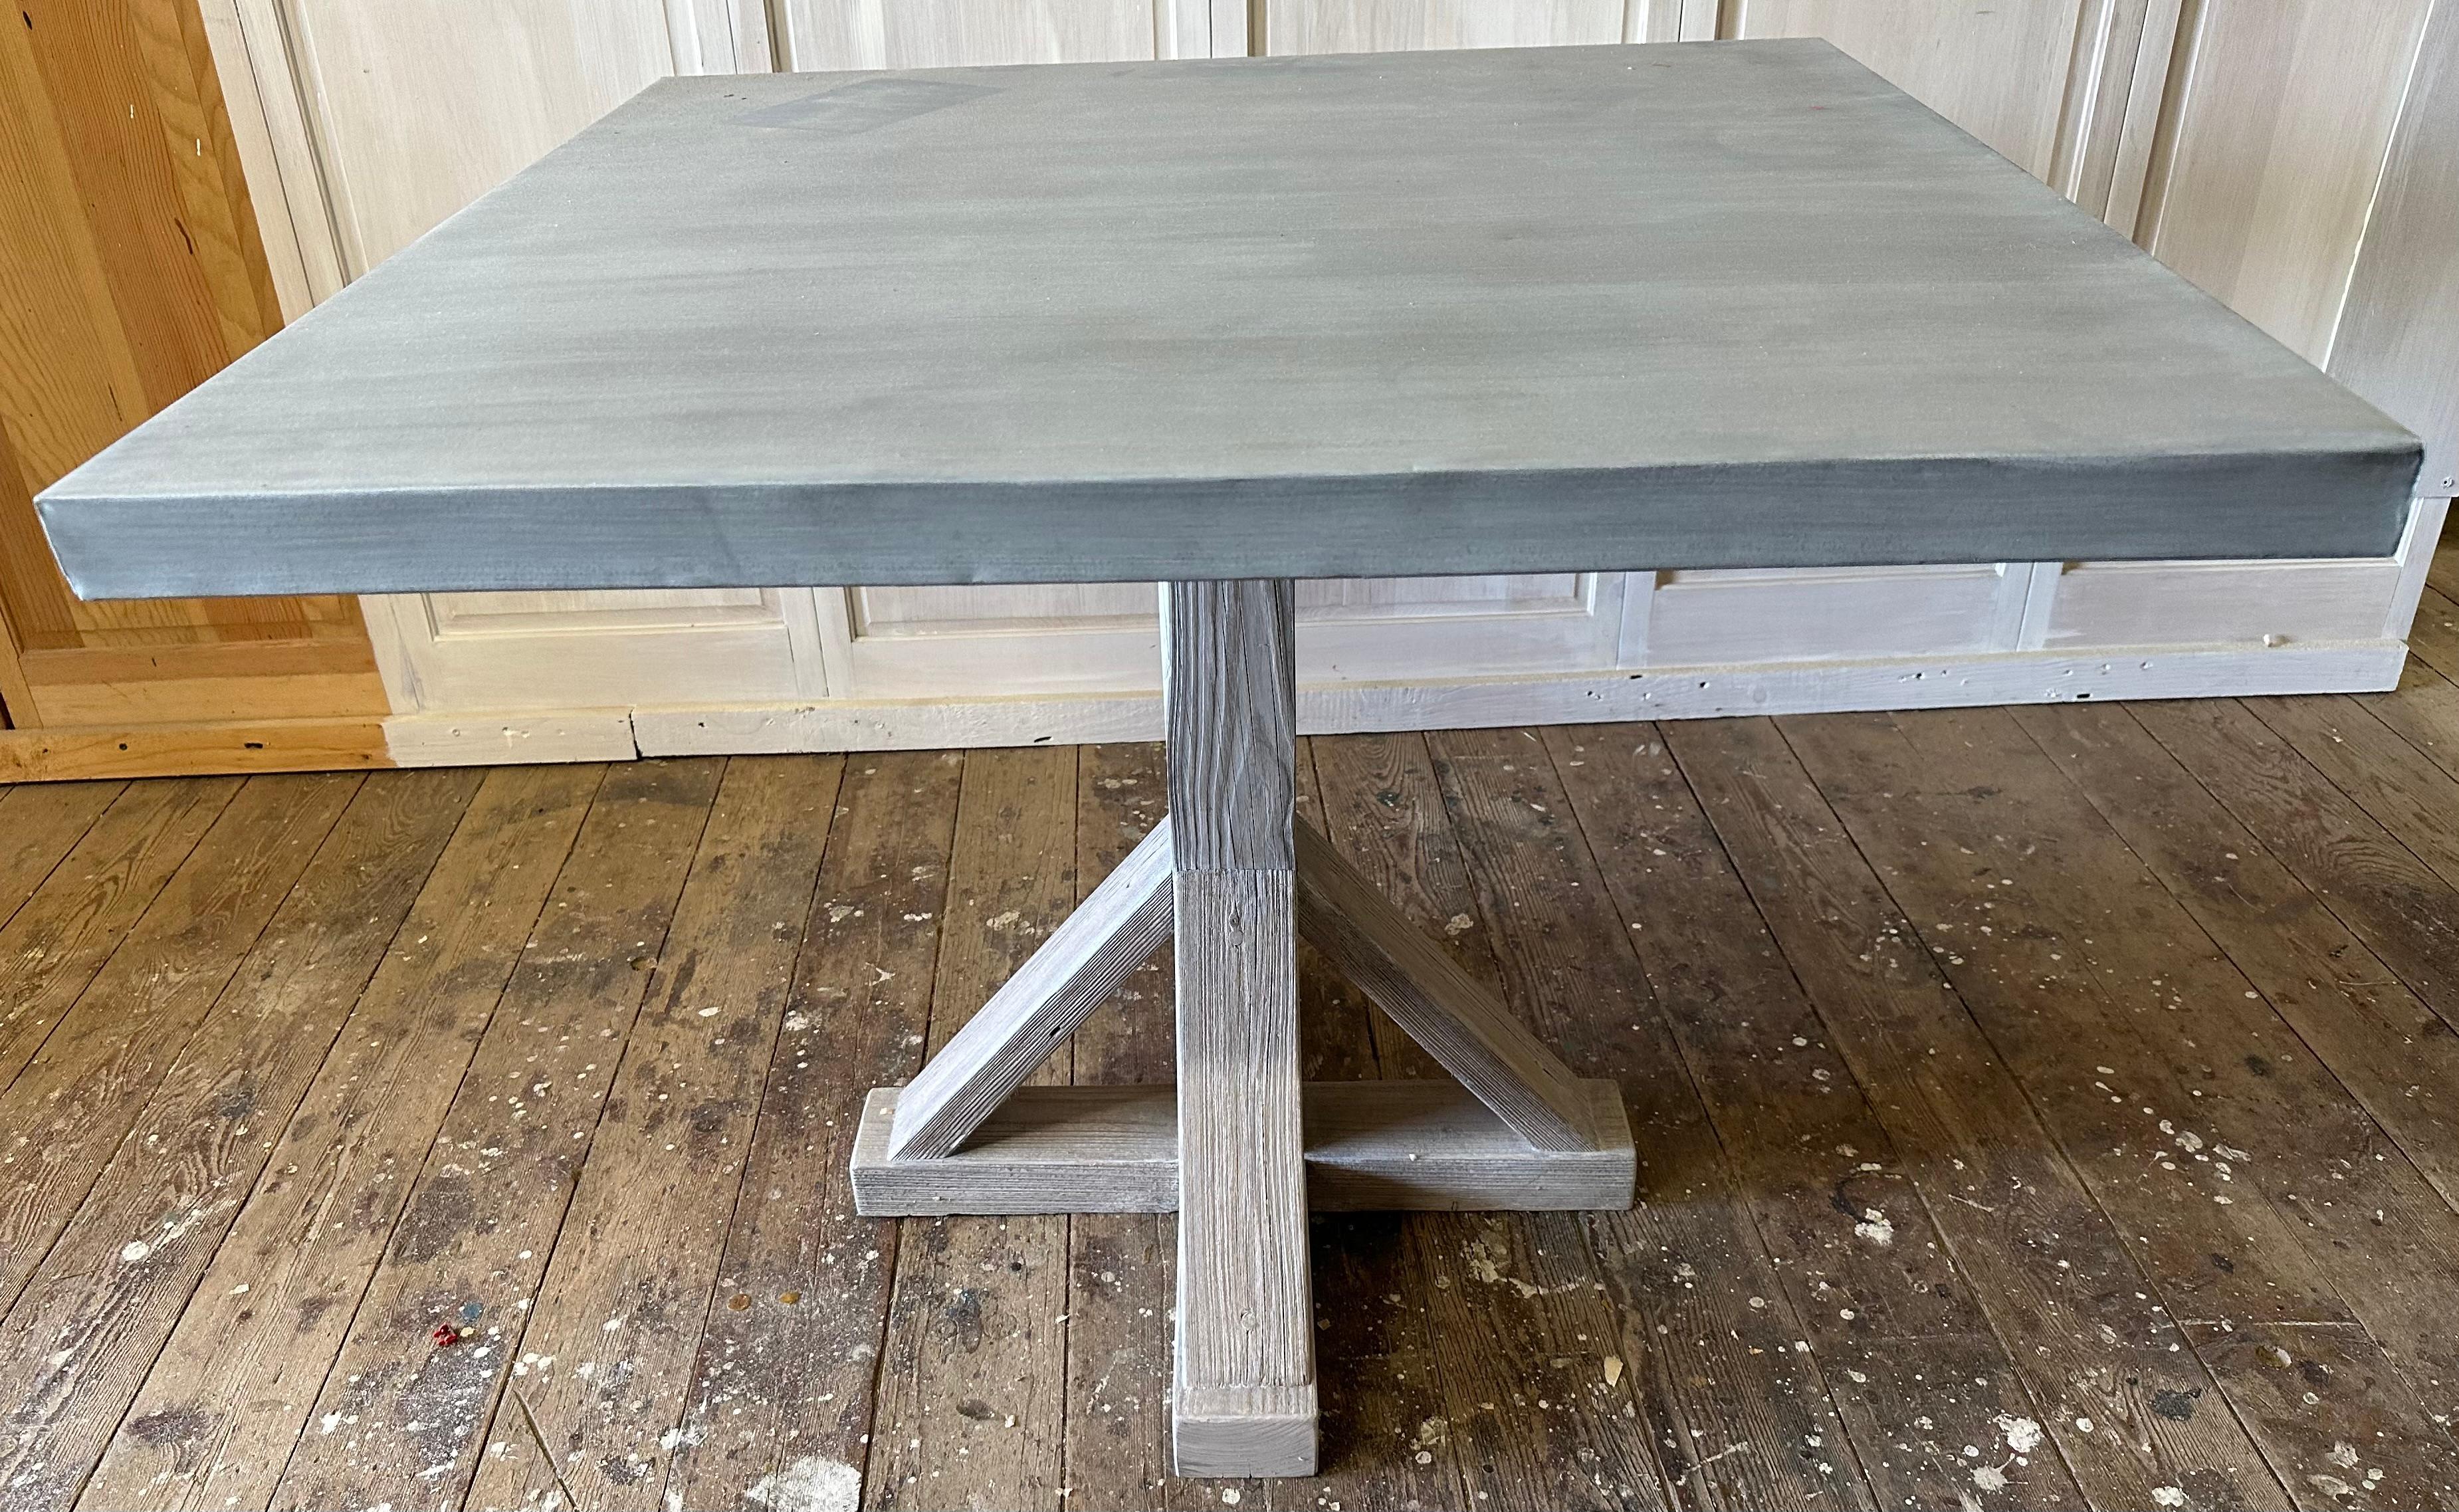 A timeless Swedish Gustavian inspired farmhouse table made with square zinc table top and a white washed wood pedestal table base. The table makes a perfect addition to any kitchen or dining room. Natural and rustic in appearance, will be suitable